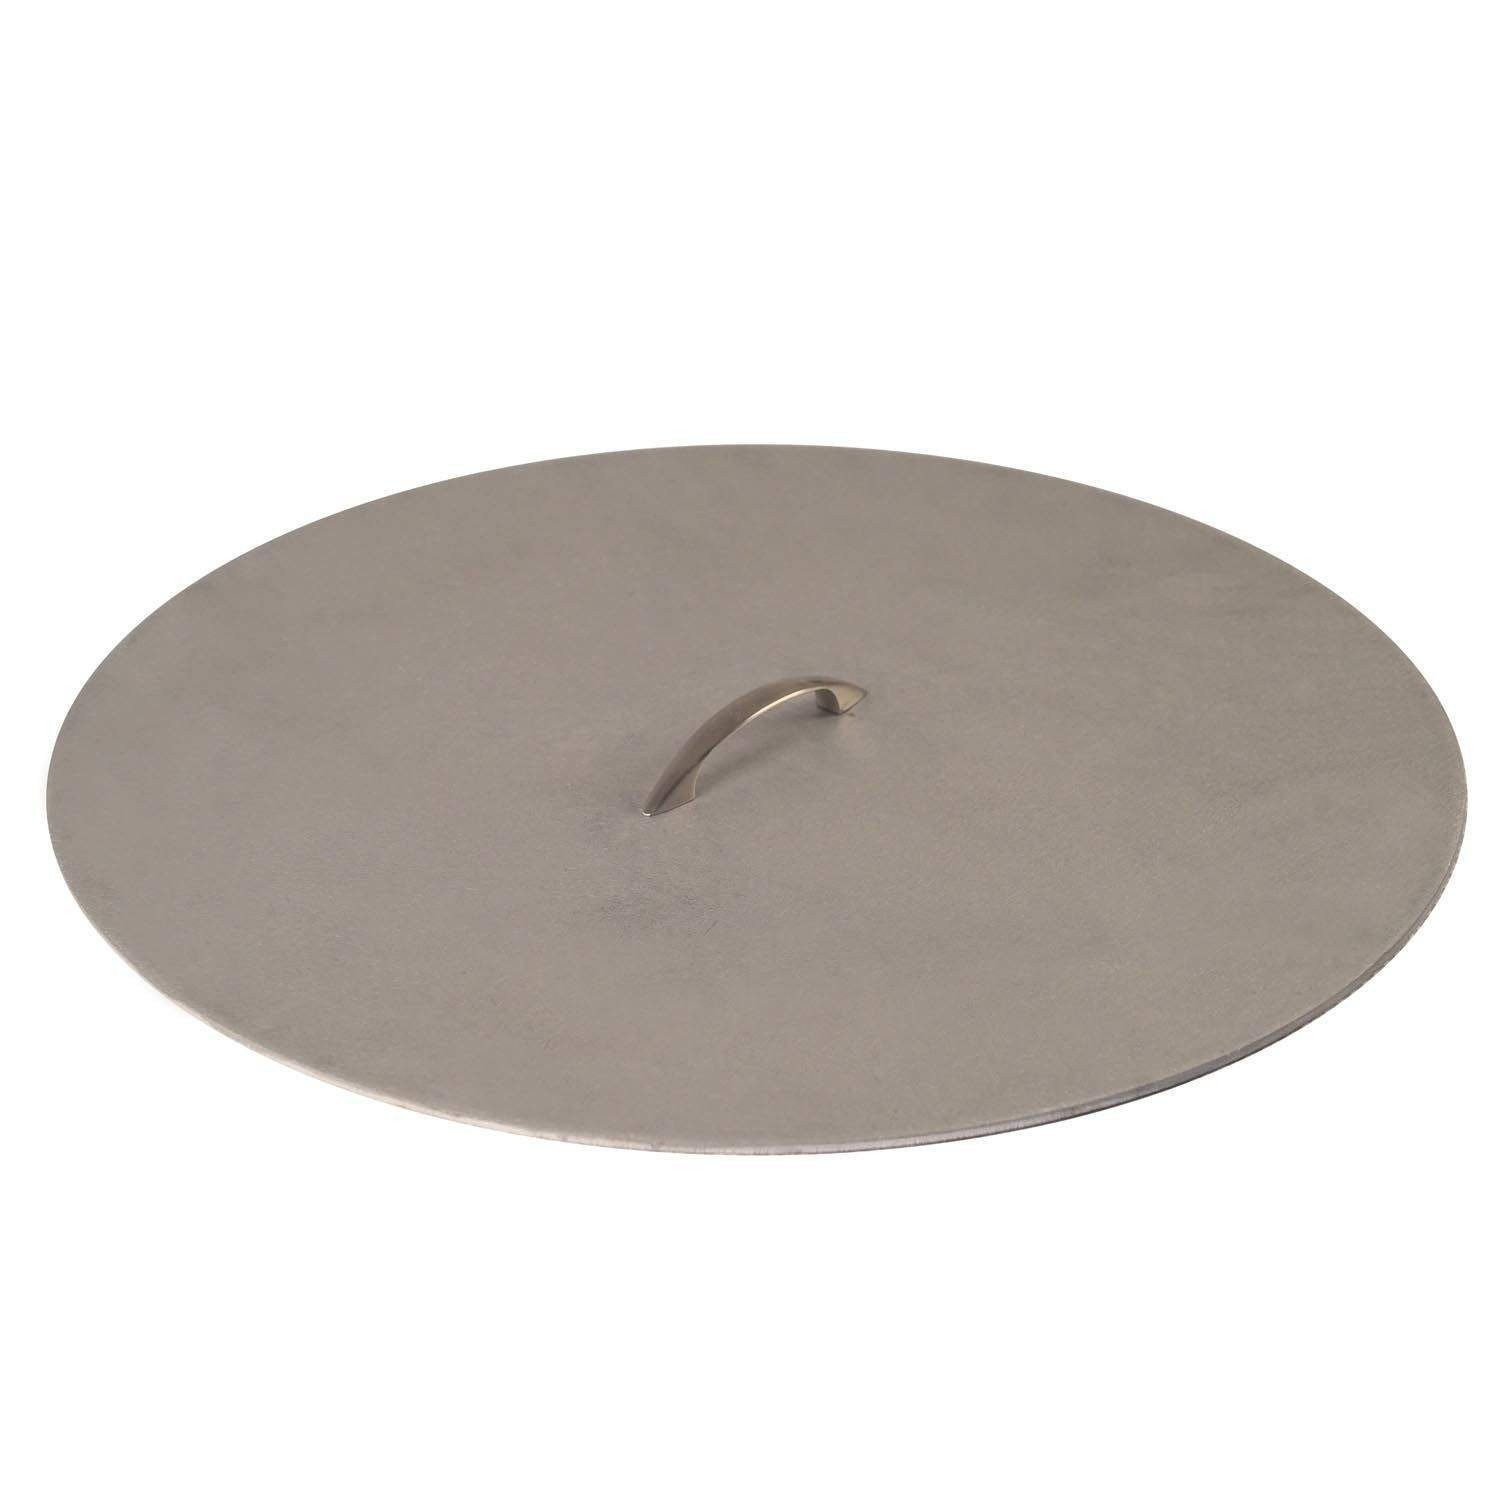 Warming Trends Fpc50c Aluminum Round Fire Pit Cover 50 Inch for dimensions 1500 X 1500